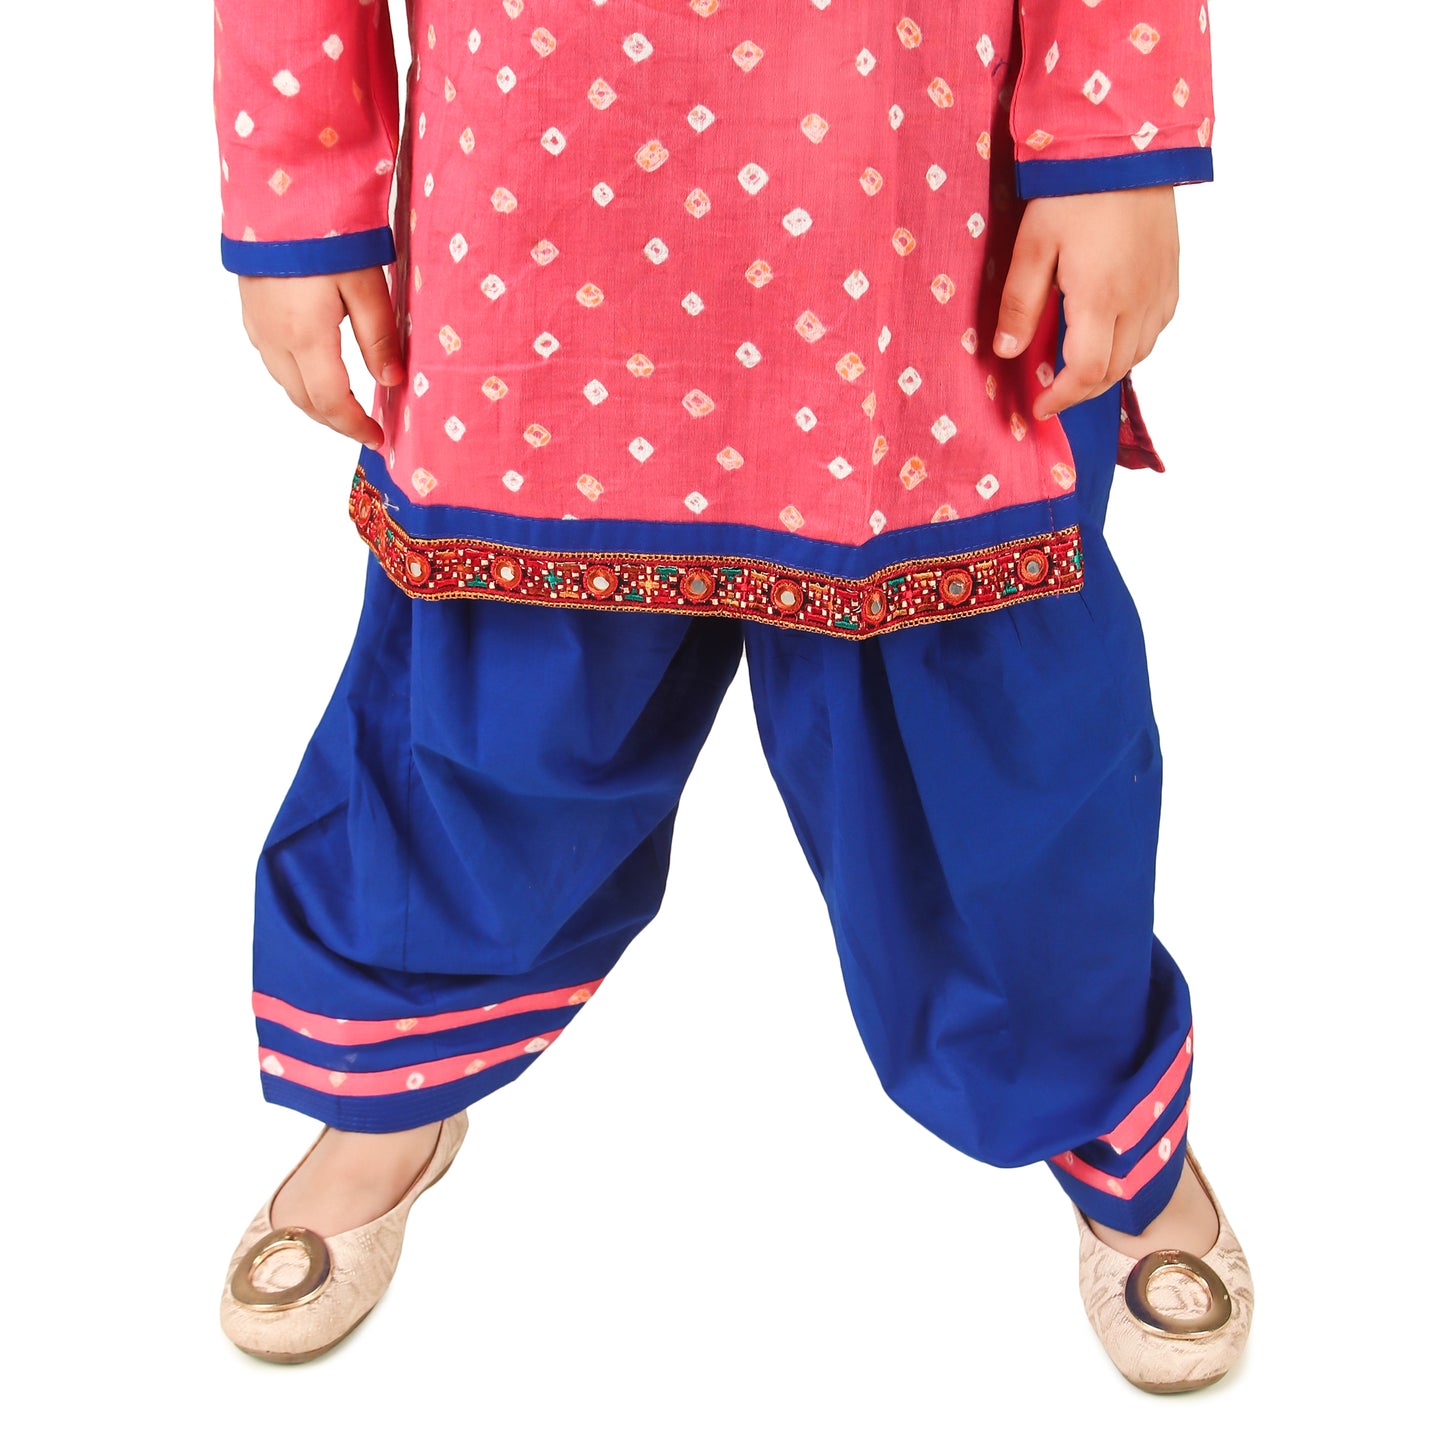 Pink Bandhani Salwar Suit for Girls, Ages 6 Months to 16 Years, Cotton, Tie-Dye